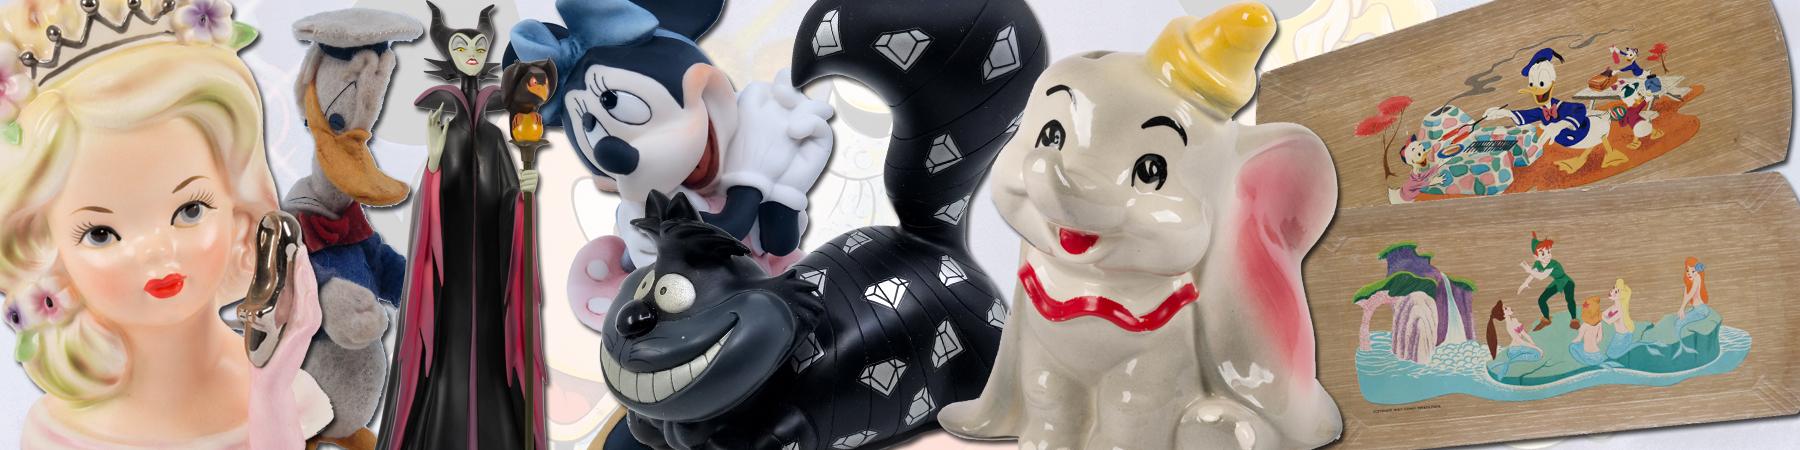 New Disney Ceramics, Figurines, Prints, and Other Hard-to-Find Collectibles